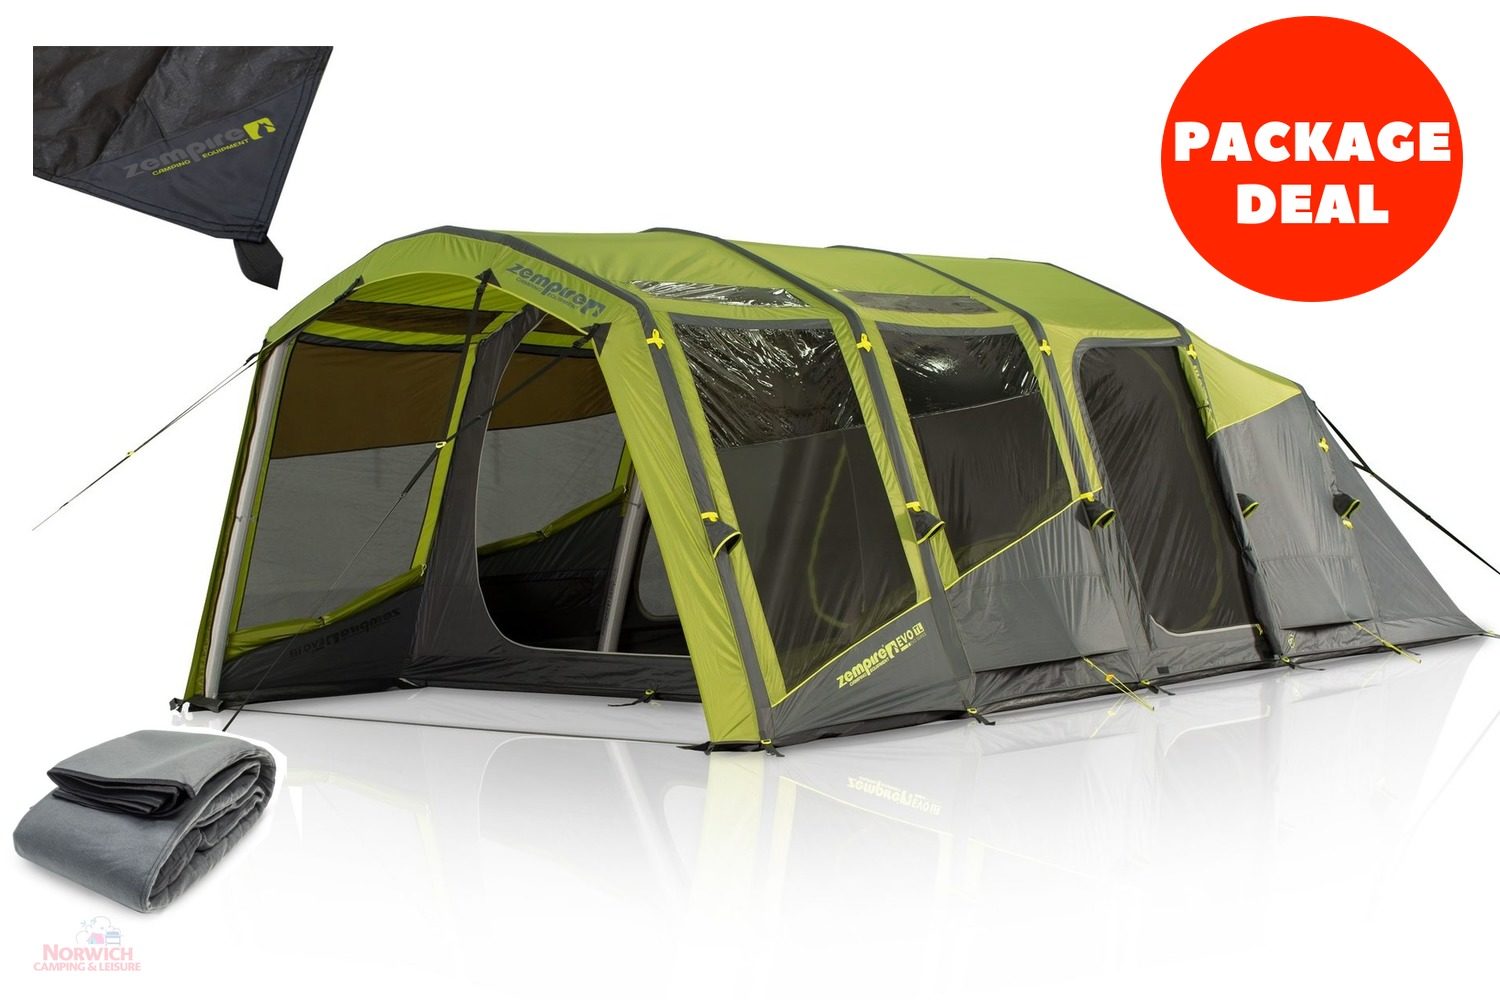 Zempire Evo Tl Tent Package Deal